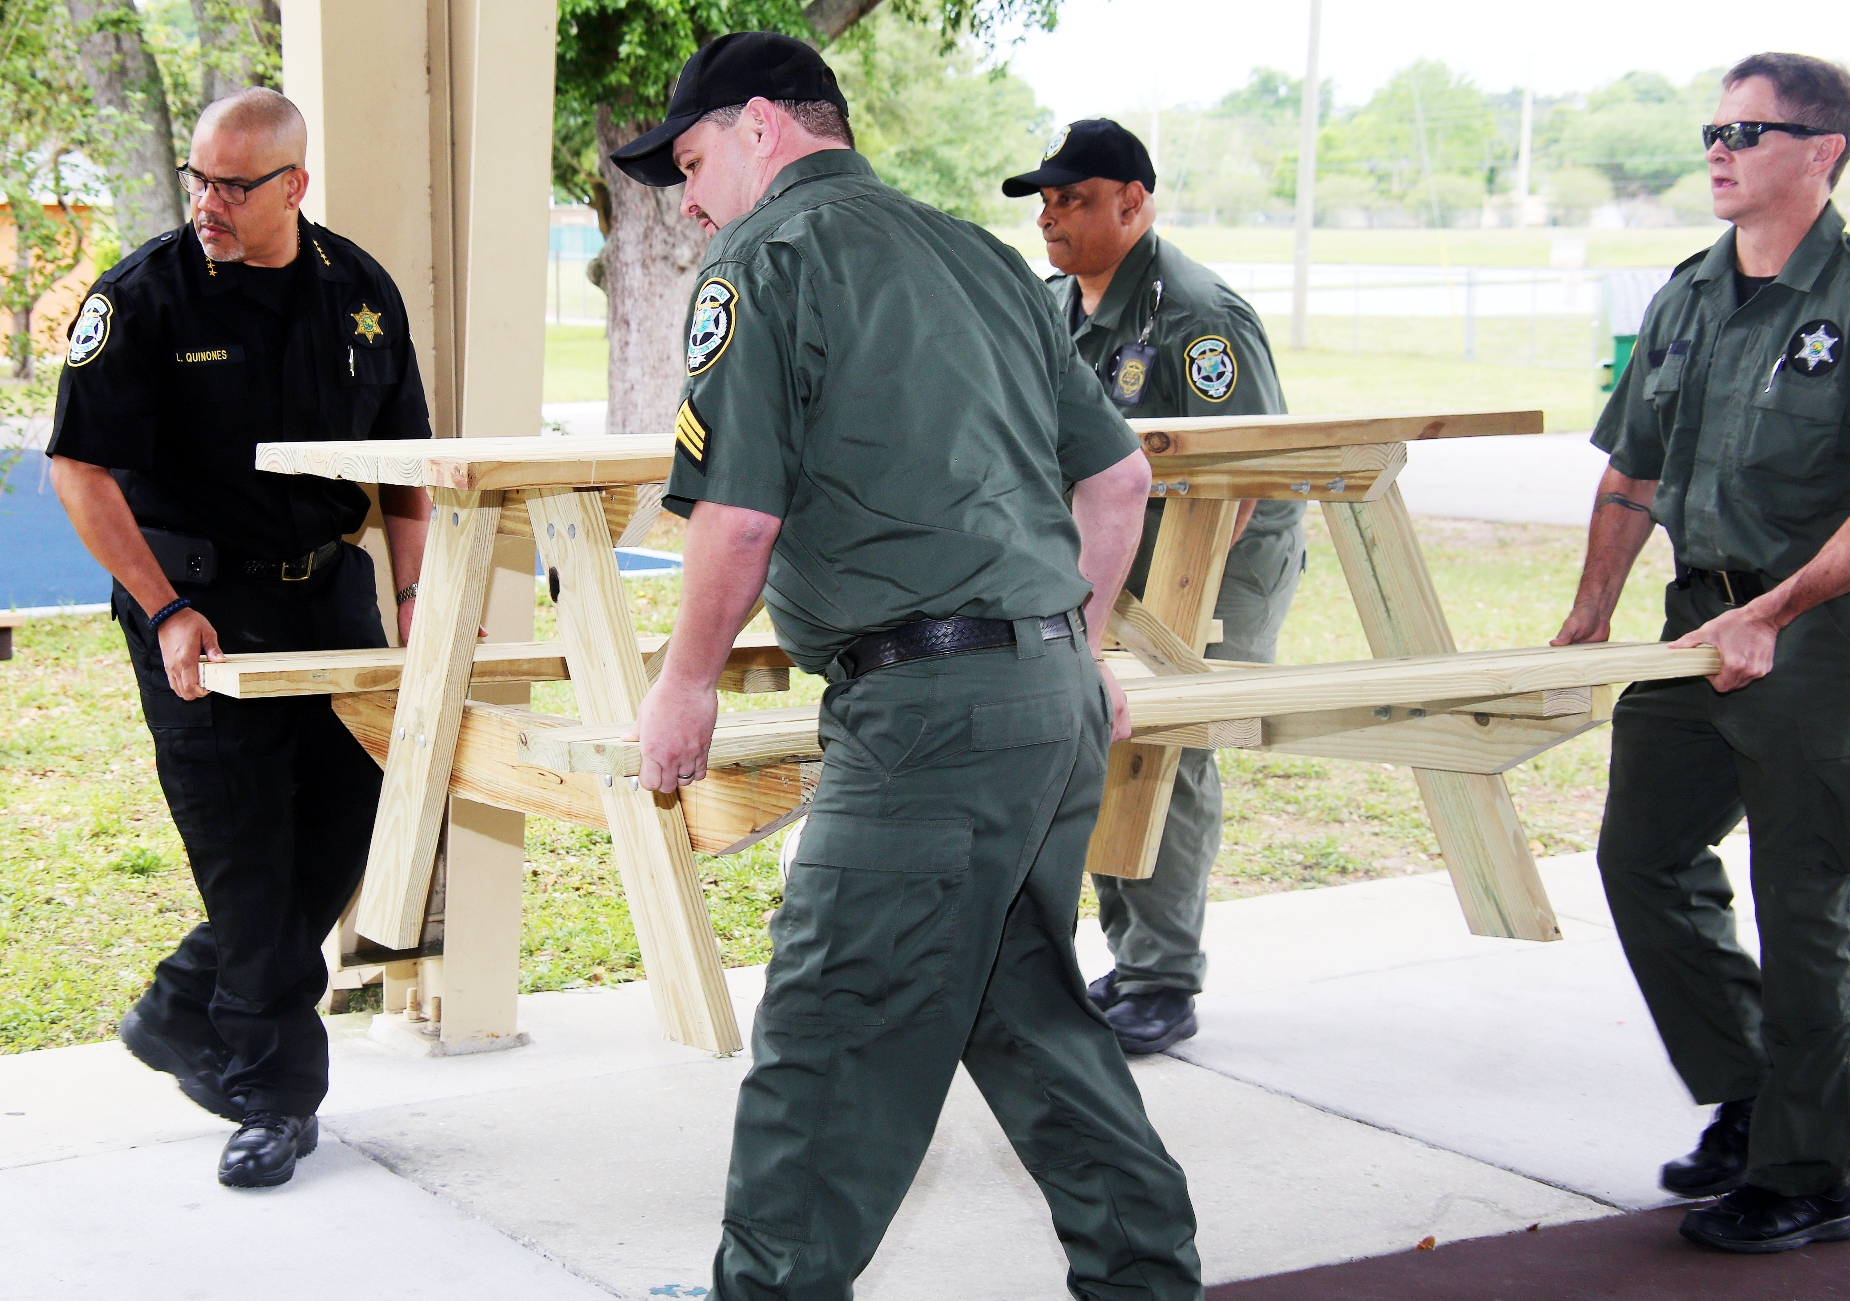 Four corrections officers carrying a picnic table with benches. They are outside under a pavilion.